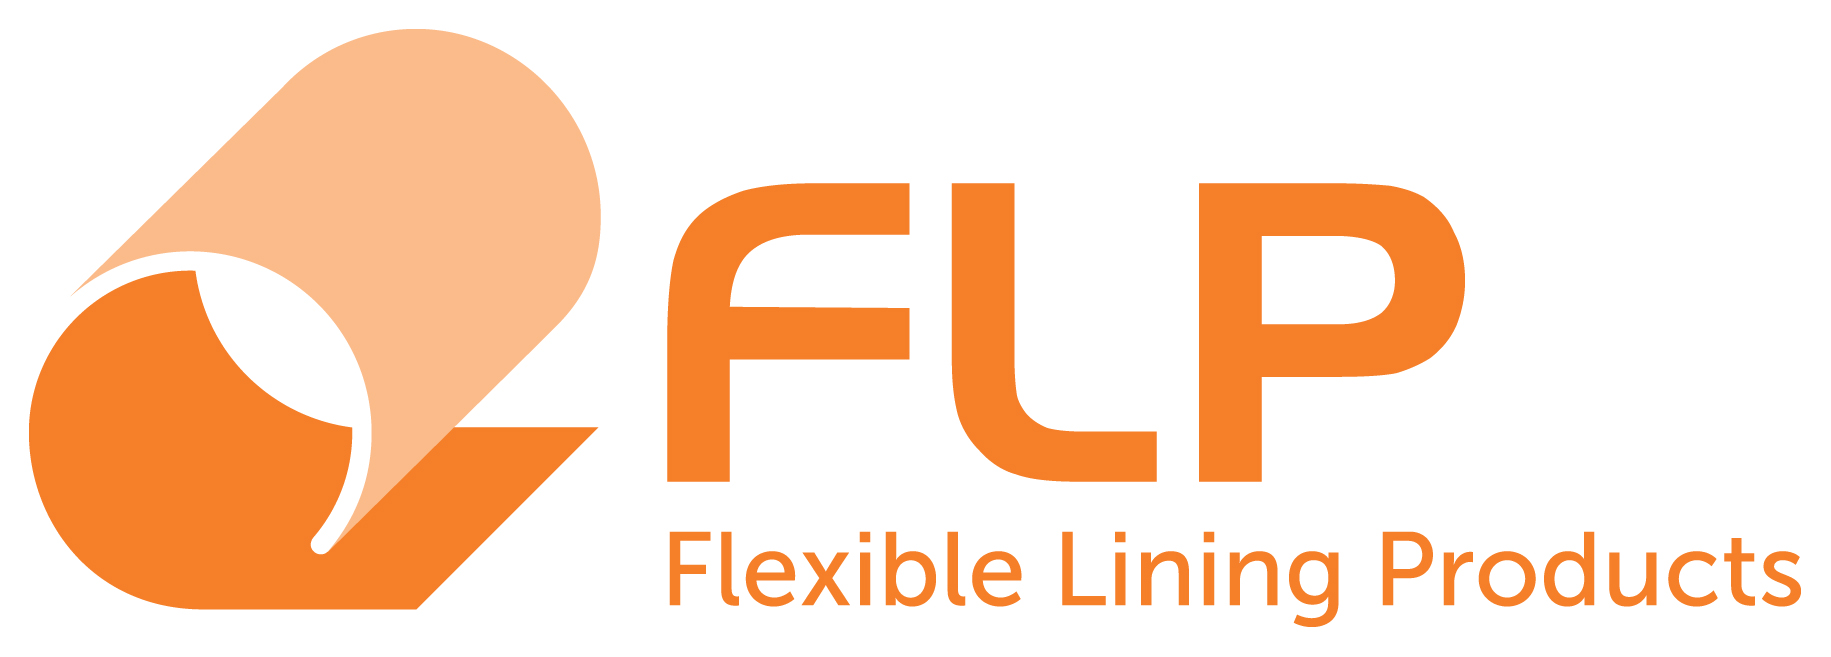 Flexible Lining Products